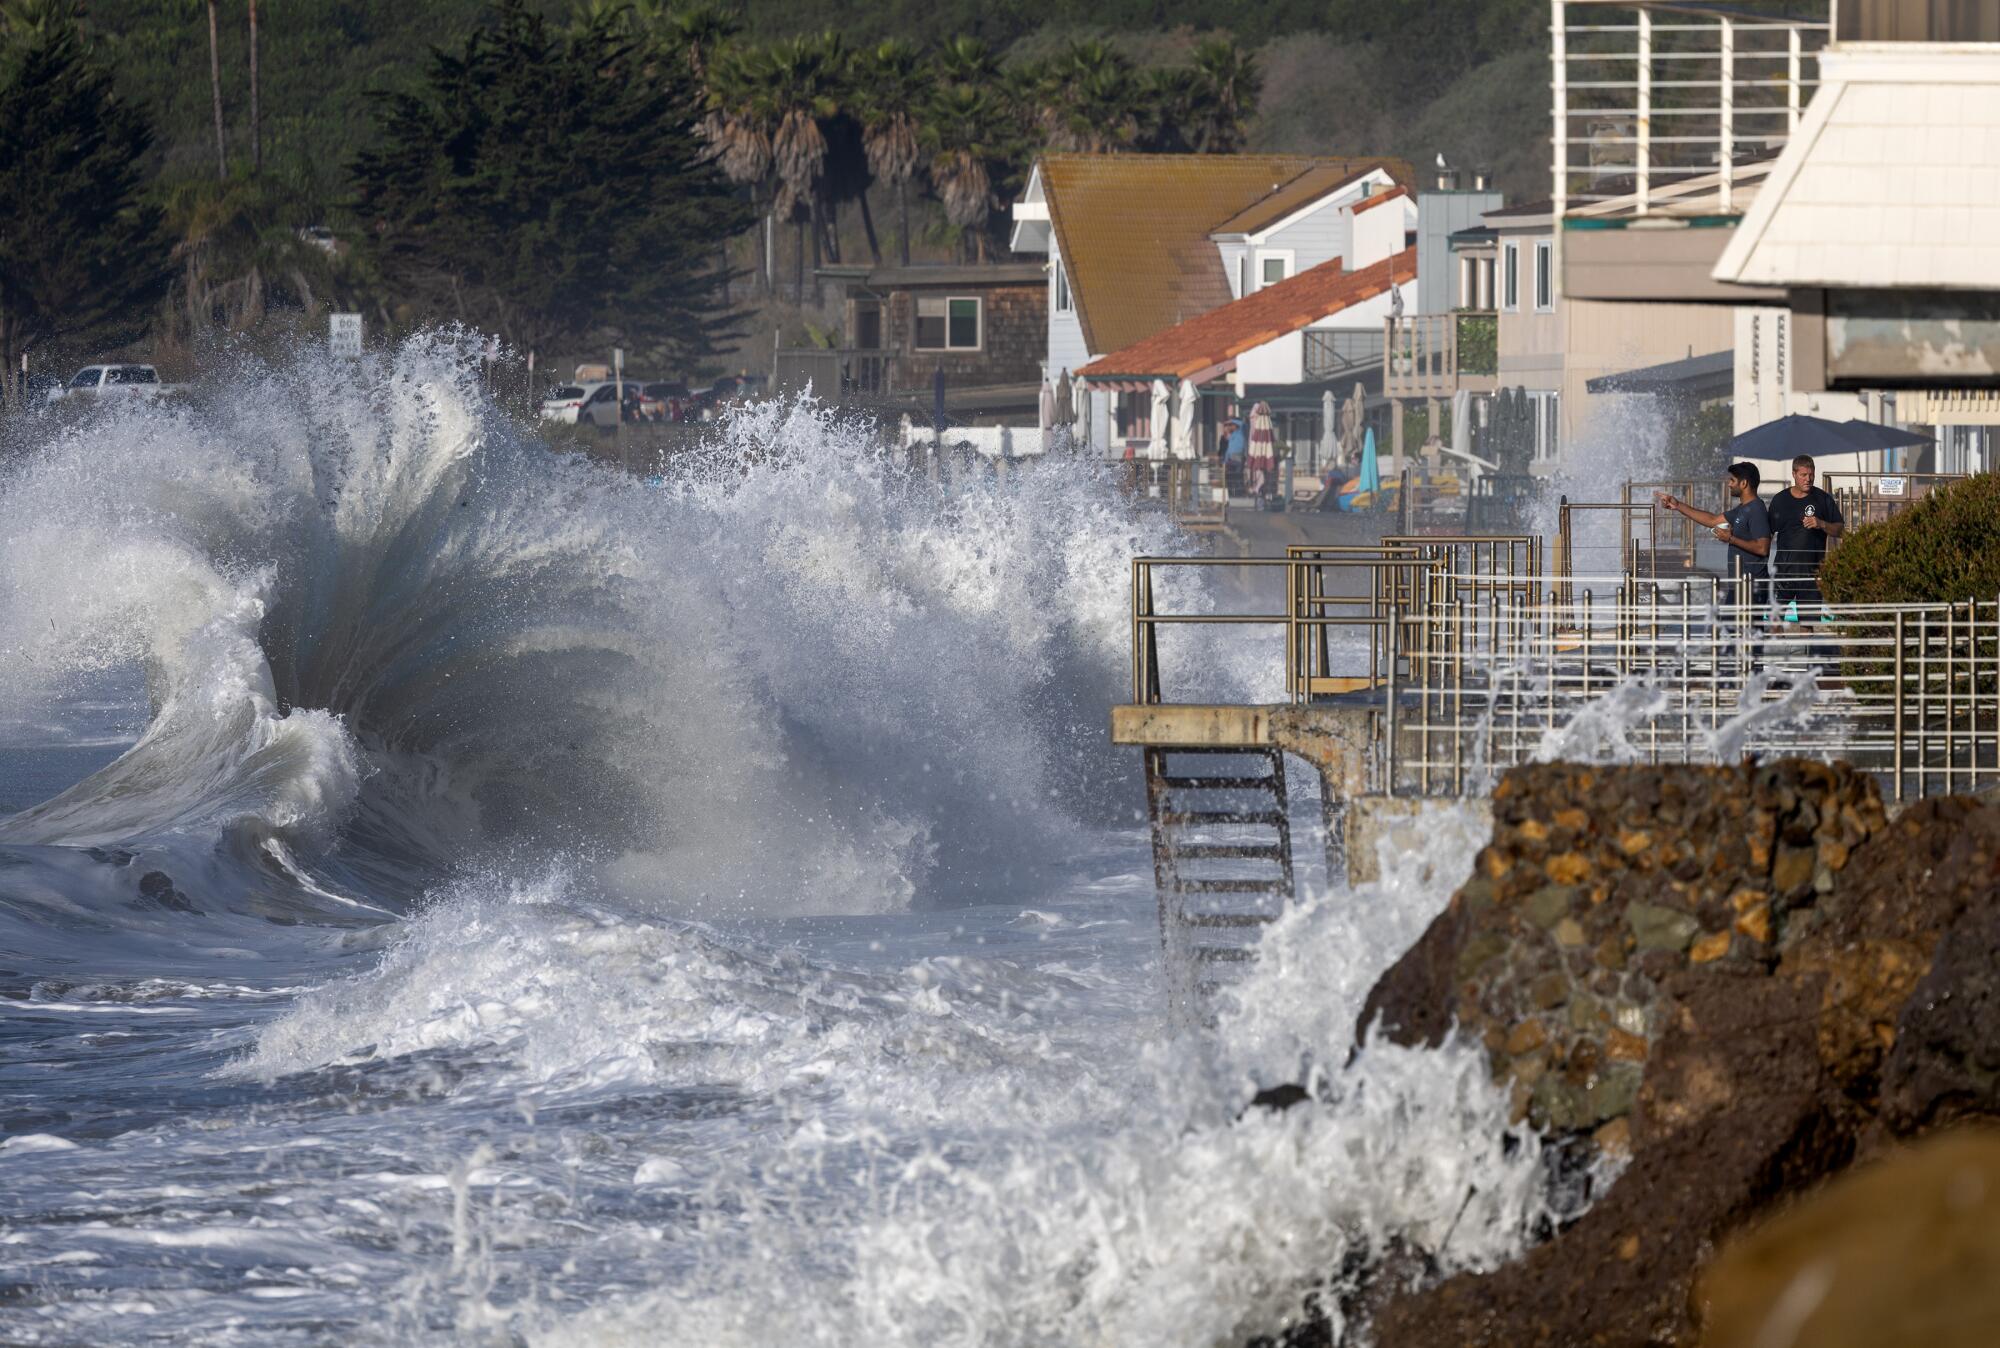 Men watch from a balcony as huge waves crash on the shore.